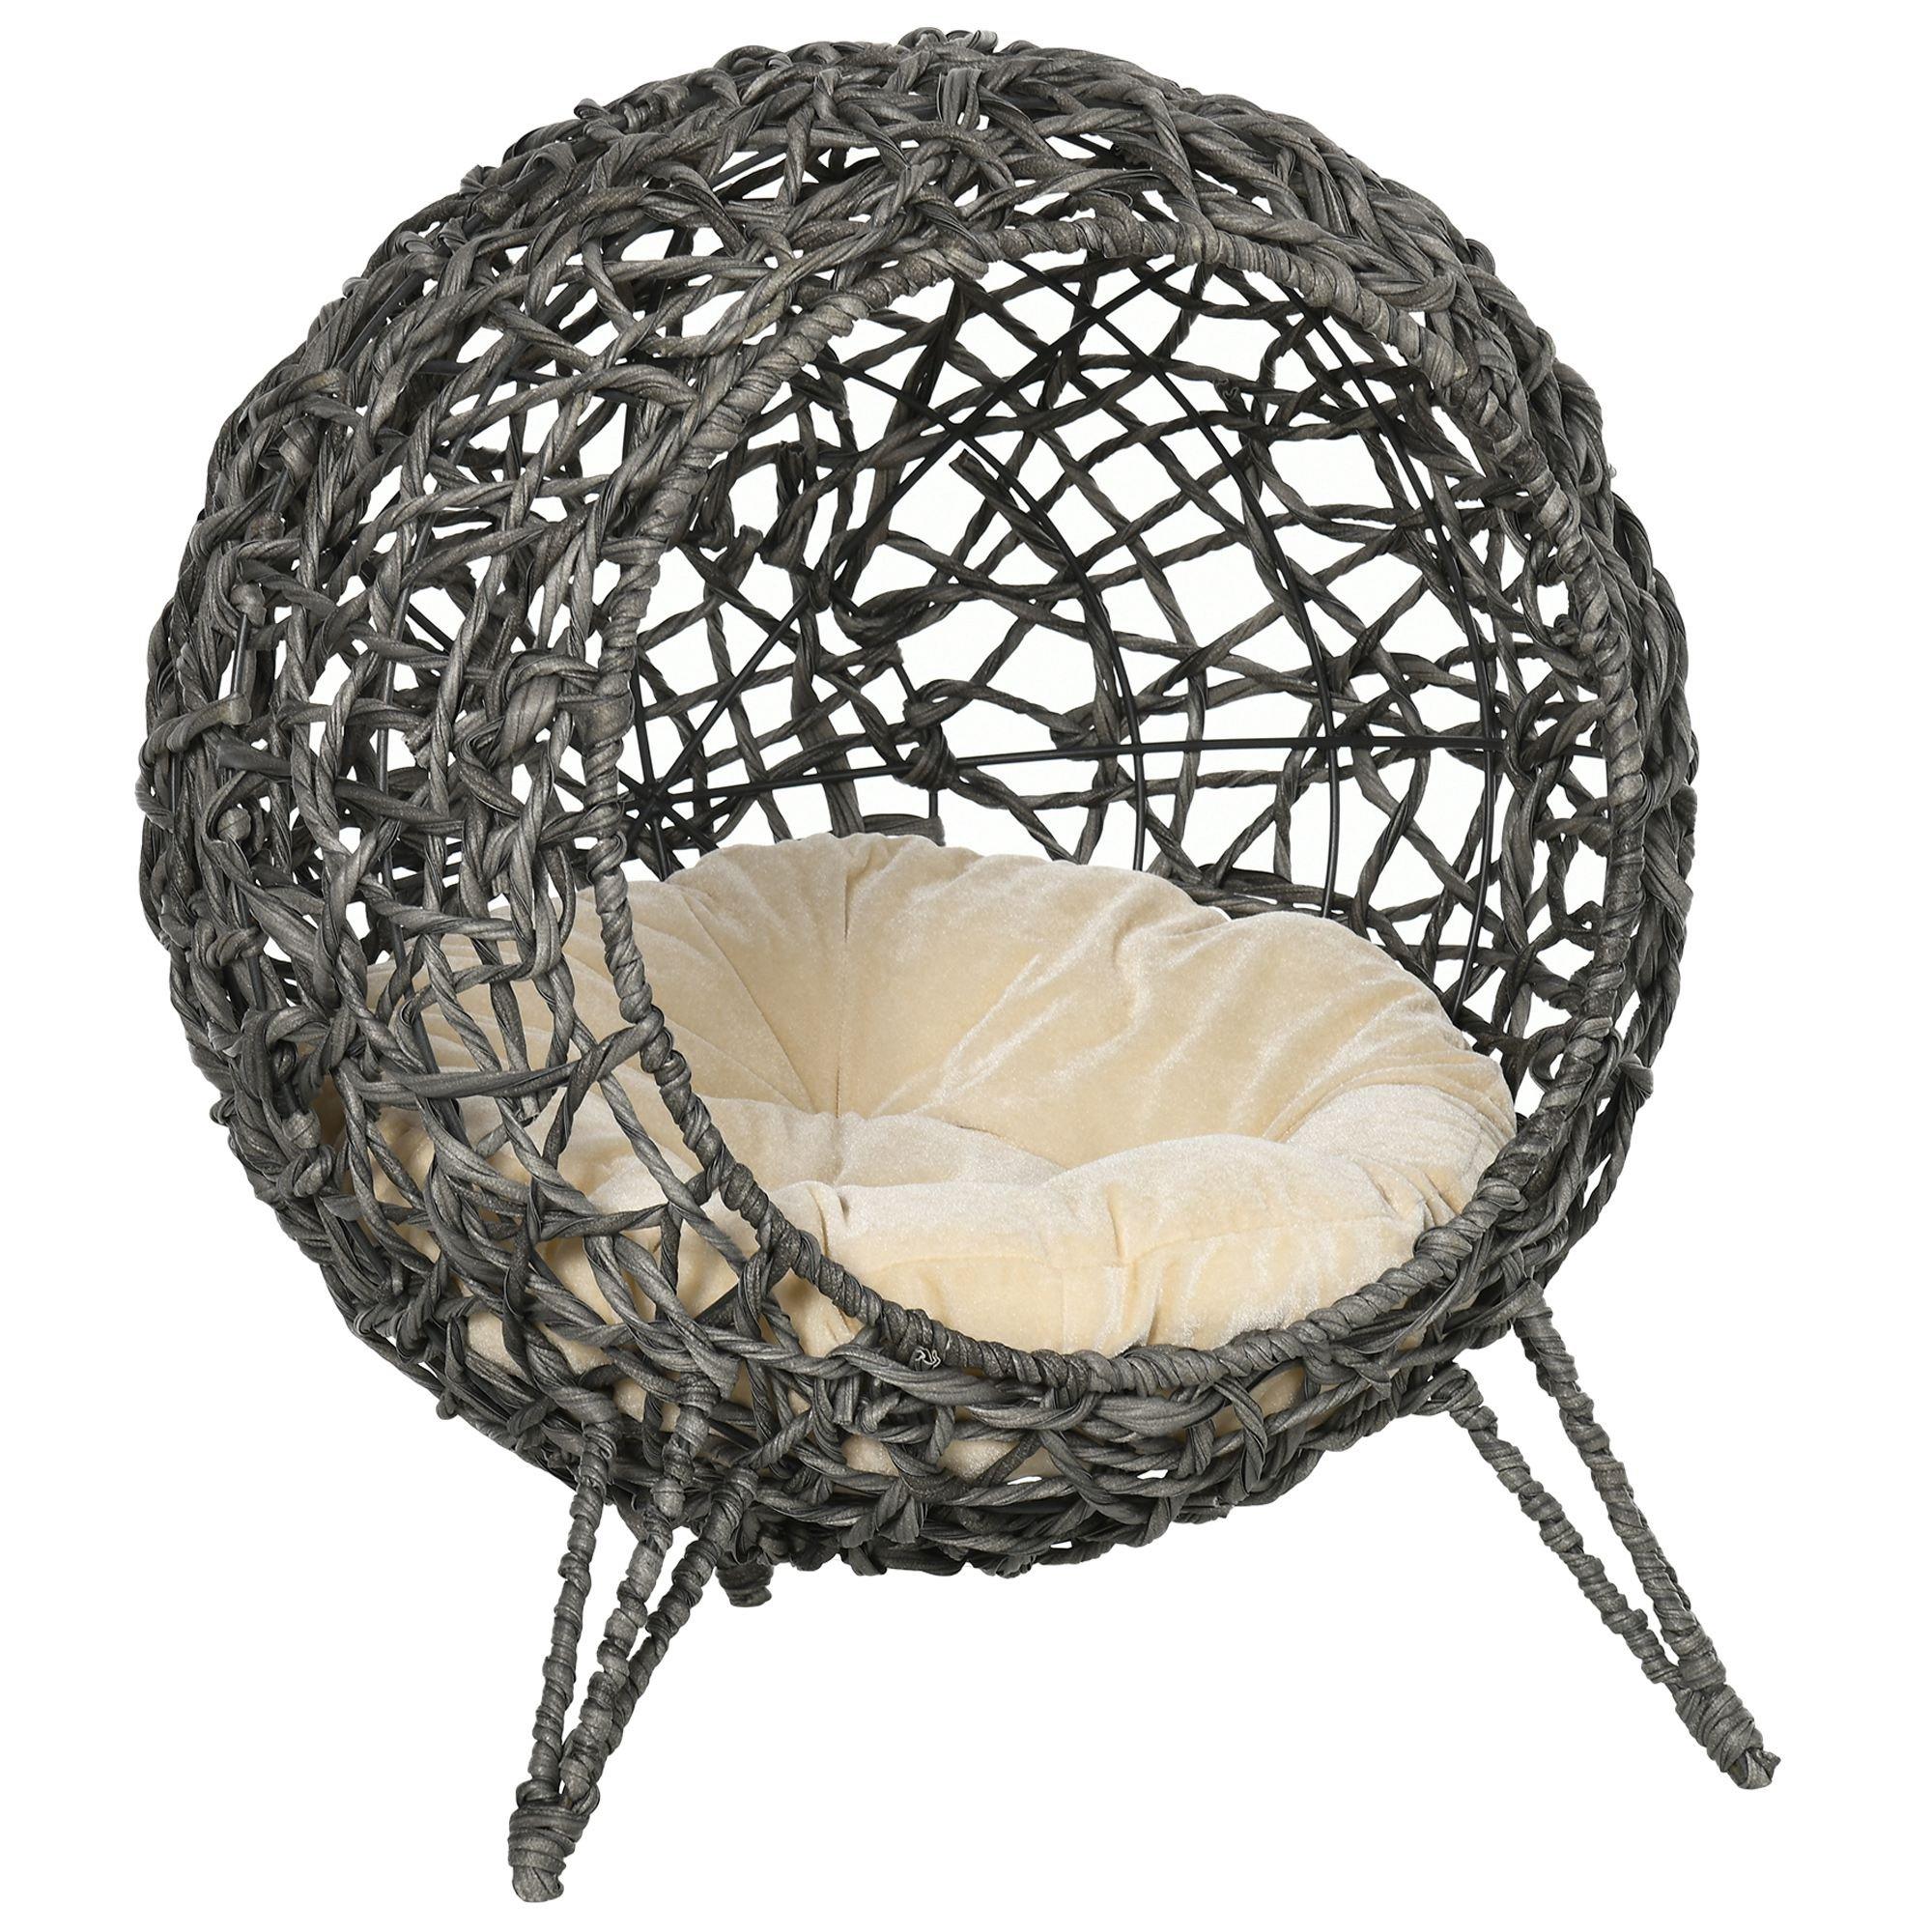 Wicker Cat House, Rattan Elevated Cat Bed with Cushion